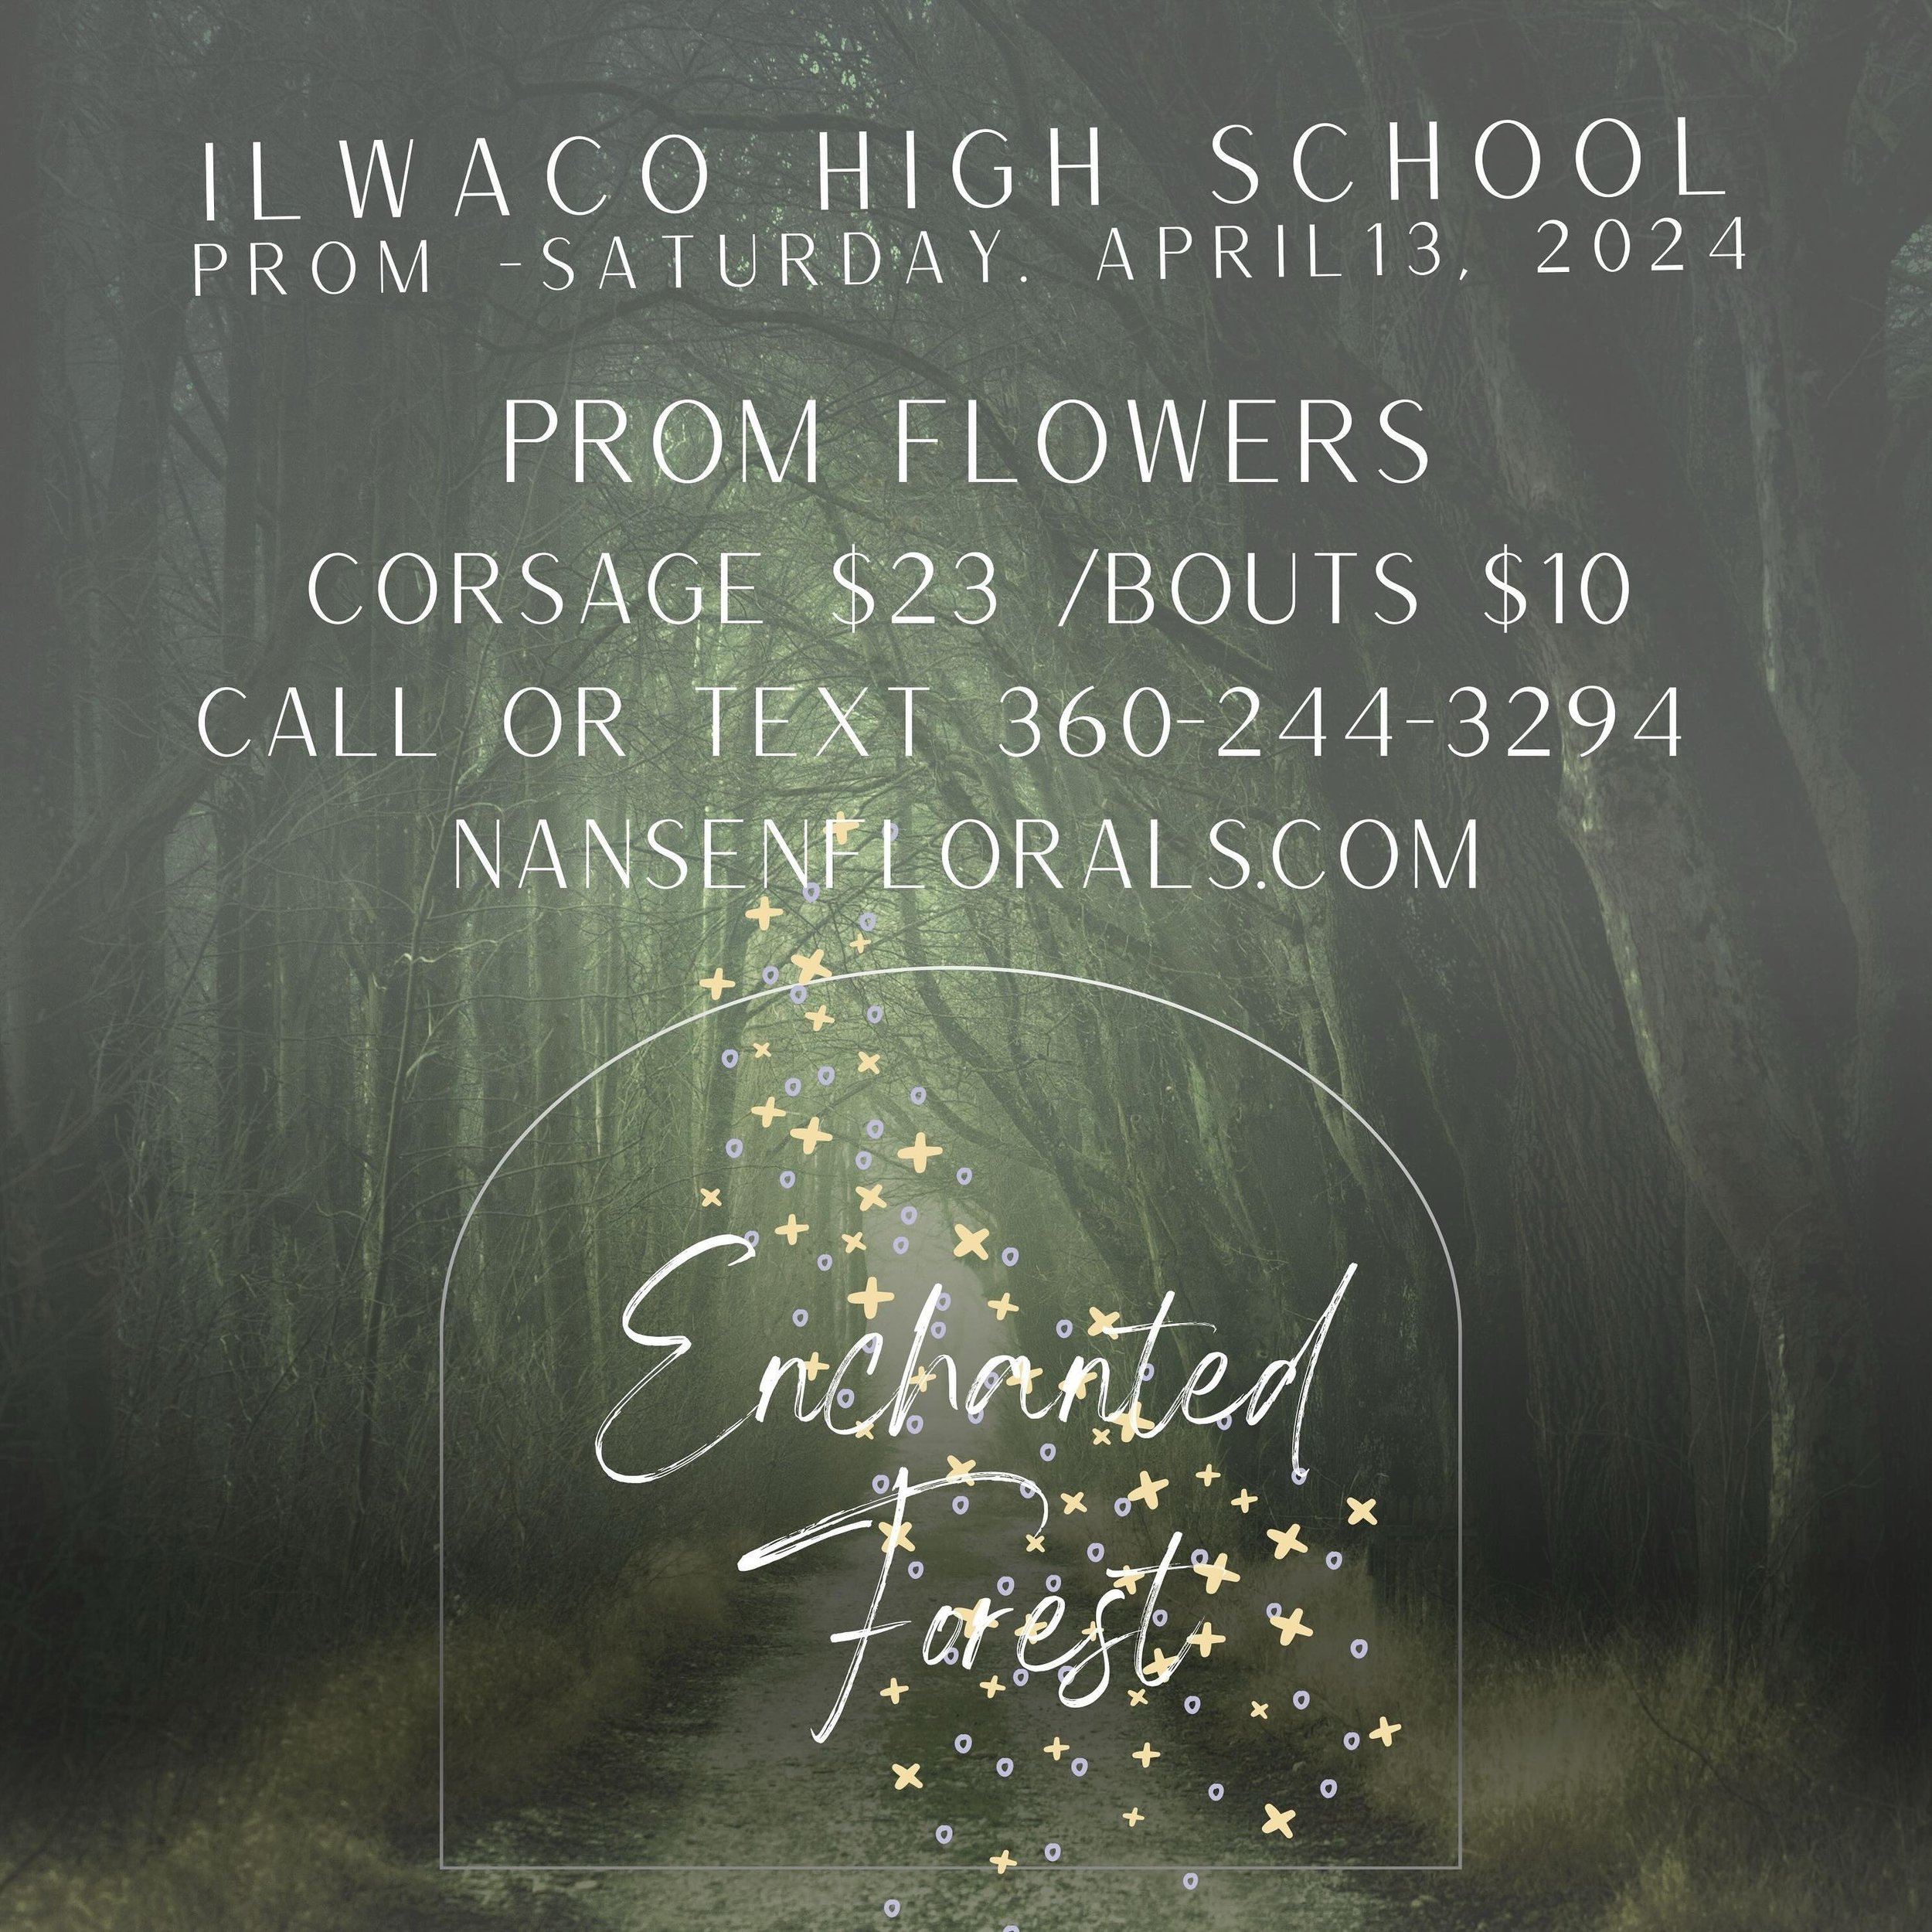 Ilwaco High School Prom - this Saturday APRIL 13, 2024. Still time to order your flowers!! Special Student Price! Call or text Nansen at 360-244-3294. Email nansenflorals@gmail.com - Need name, colors. Pay by Venmo, cash or credit/decard. We will hav